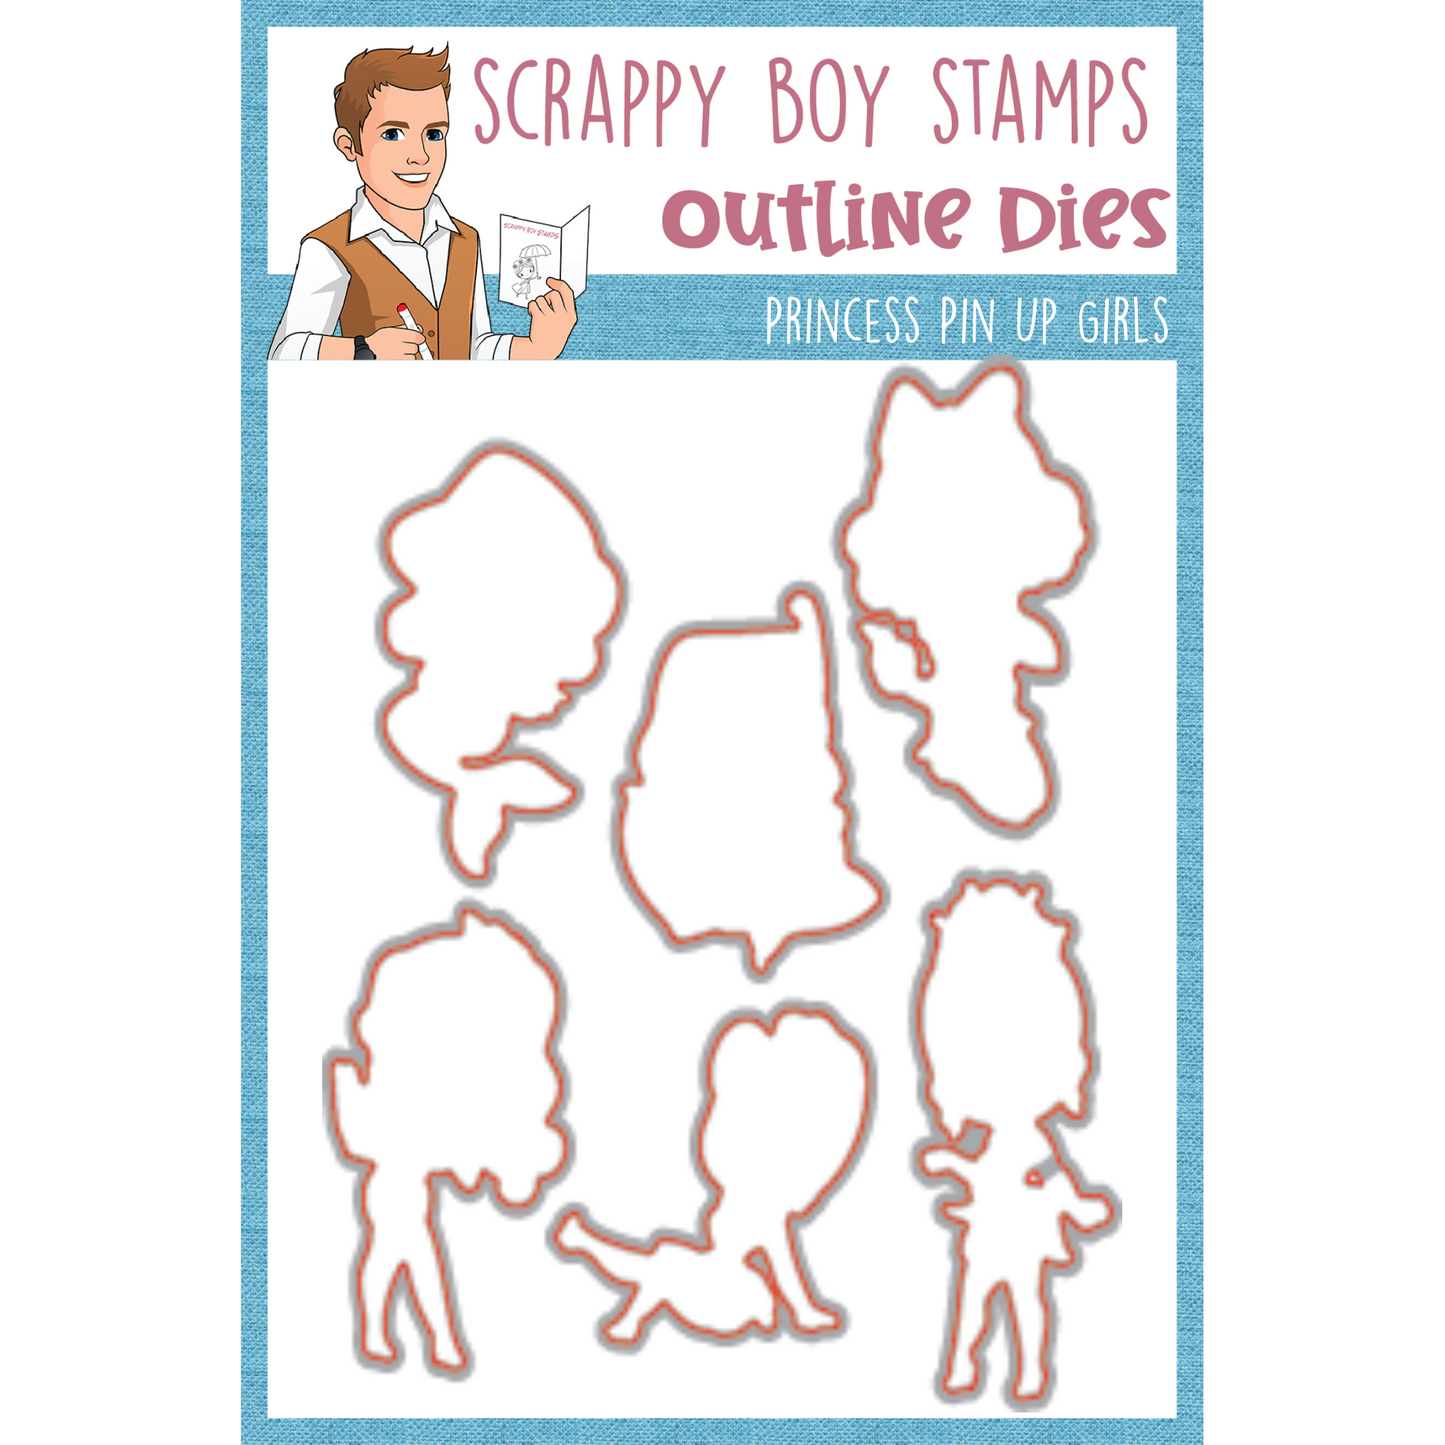 Outline Dies - Princess Pin Up Girls scrappyboystamps